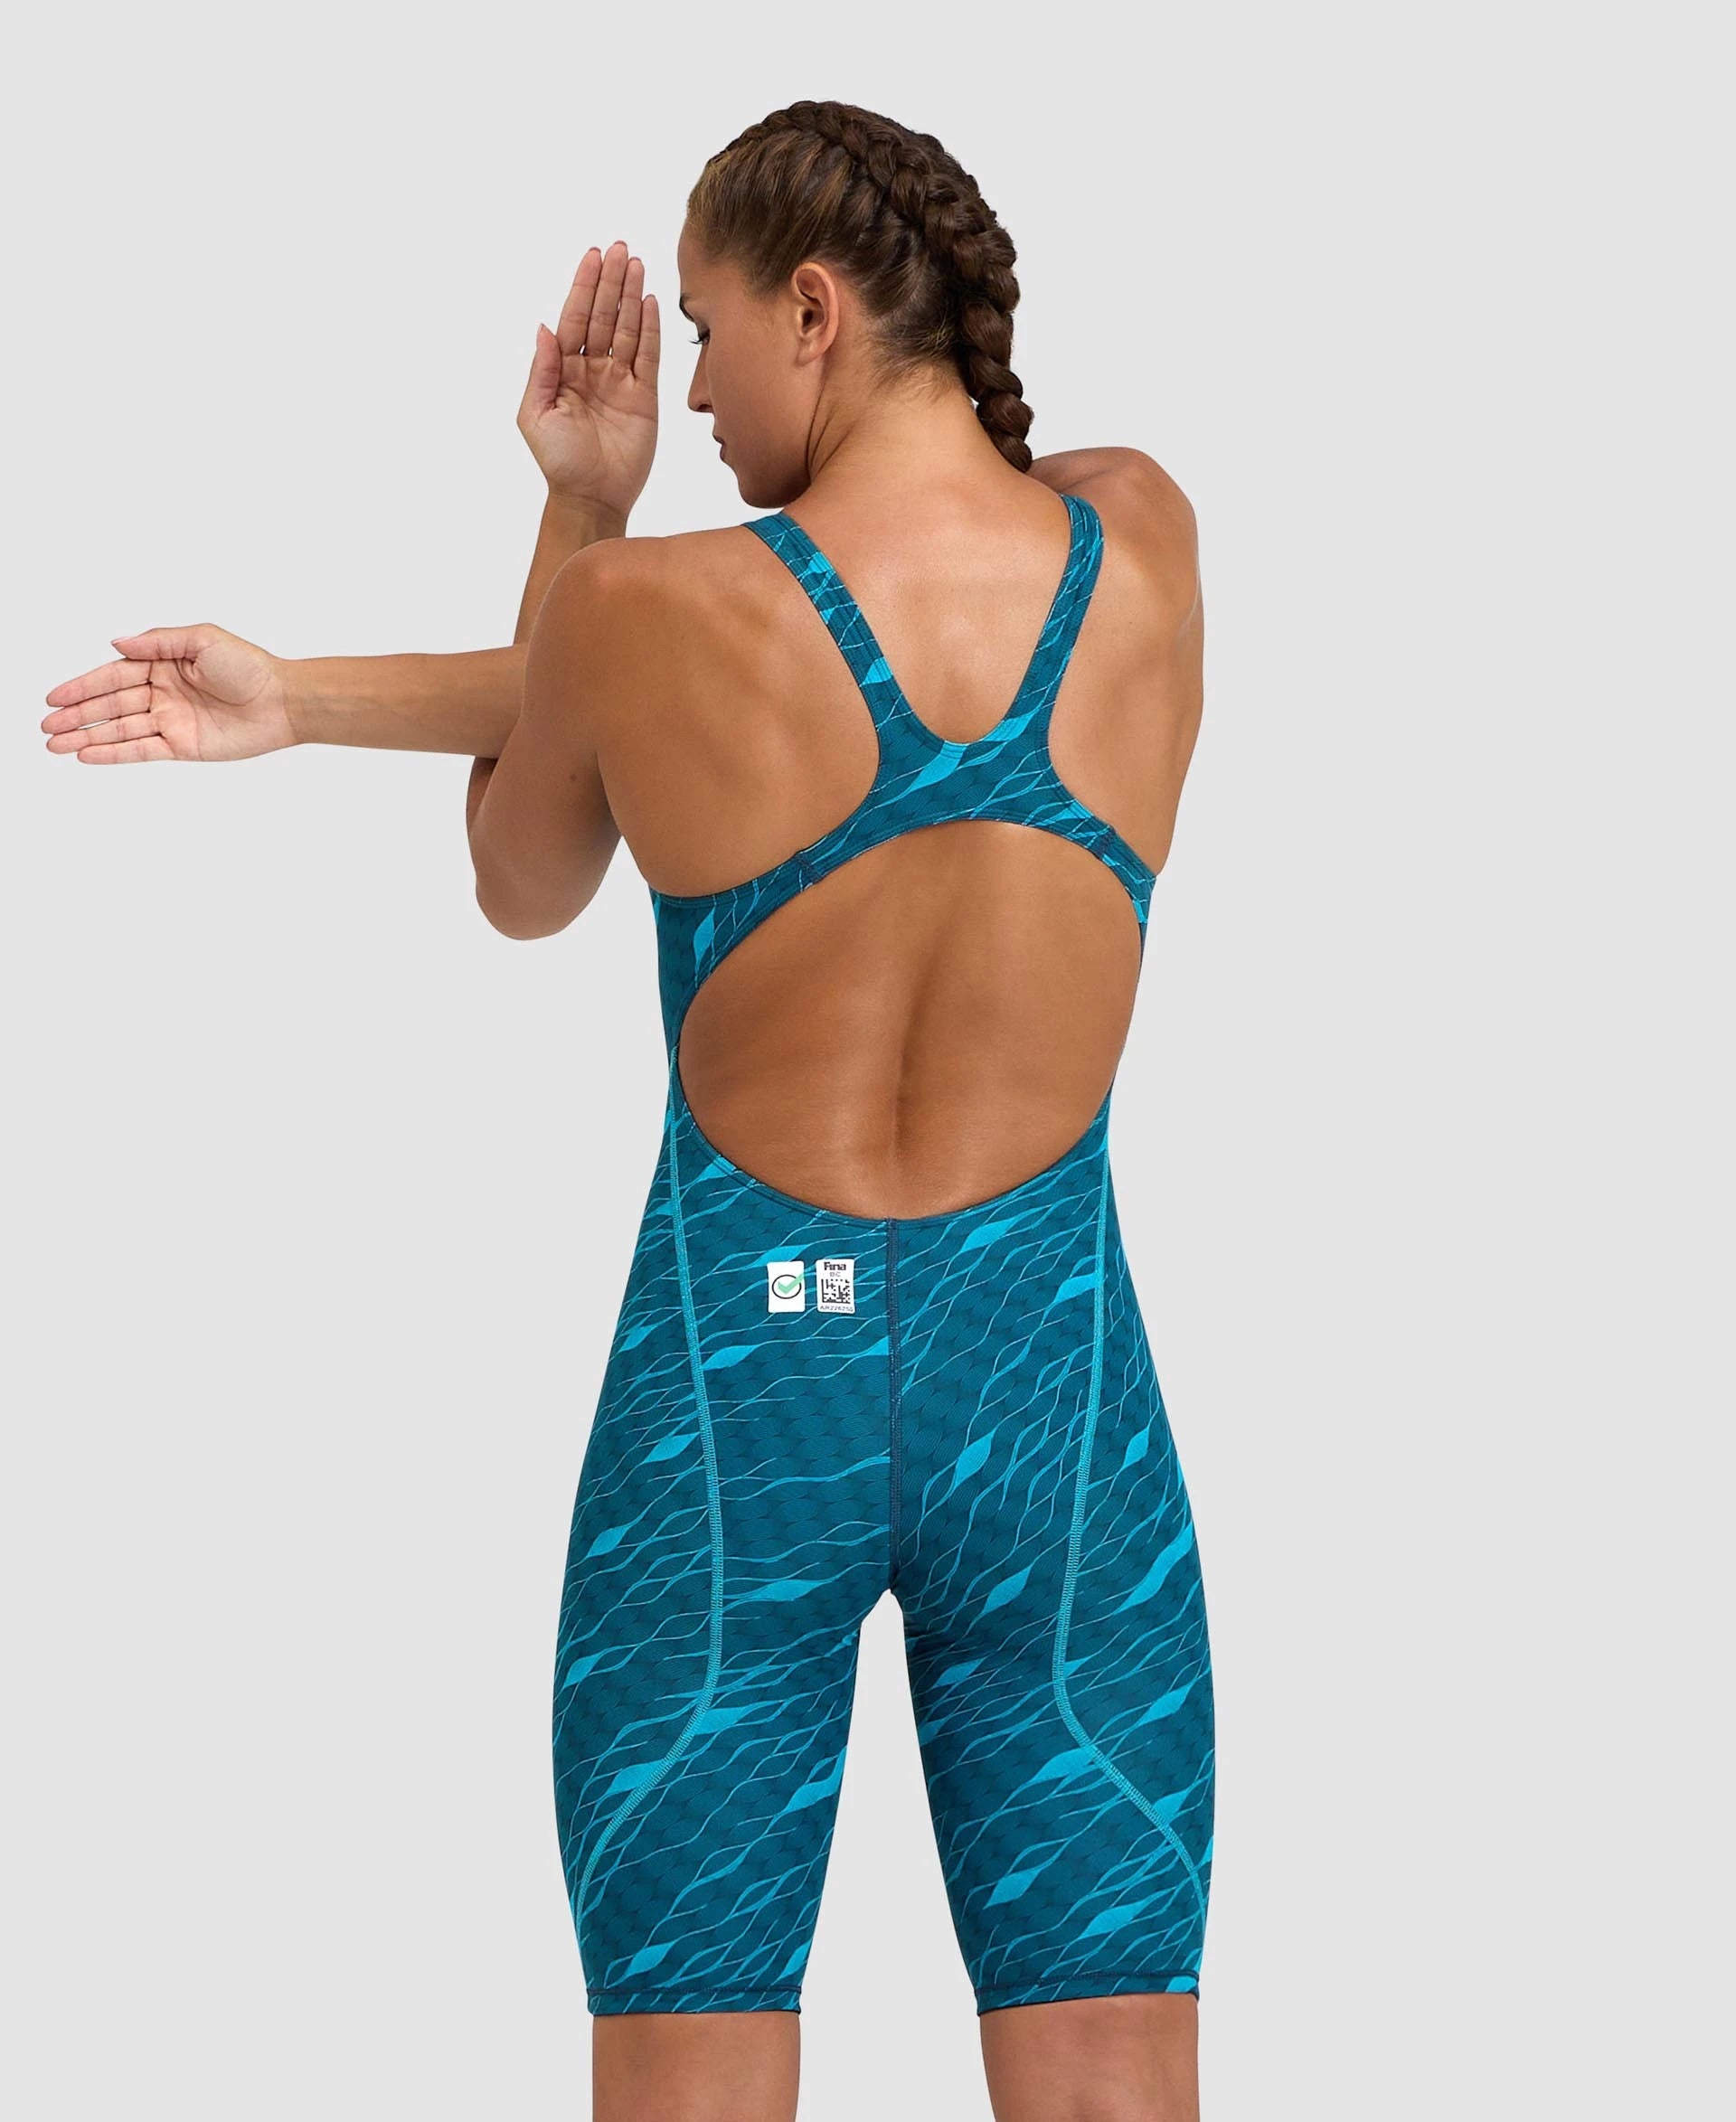 WOMEN POWERSKIN ST NEXT (LIMITED EDITION) OPEN BACK - CLEAN-SEA-BLUE - FINA APPROVED